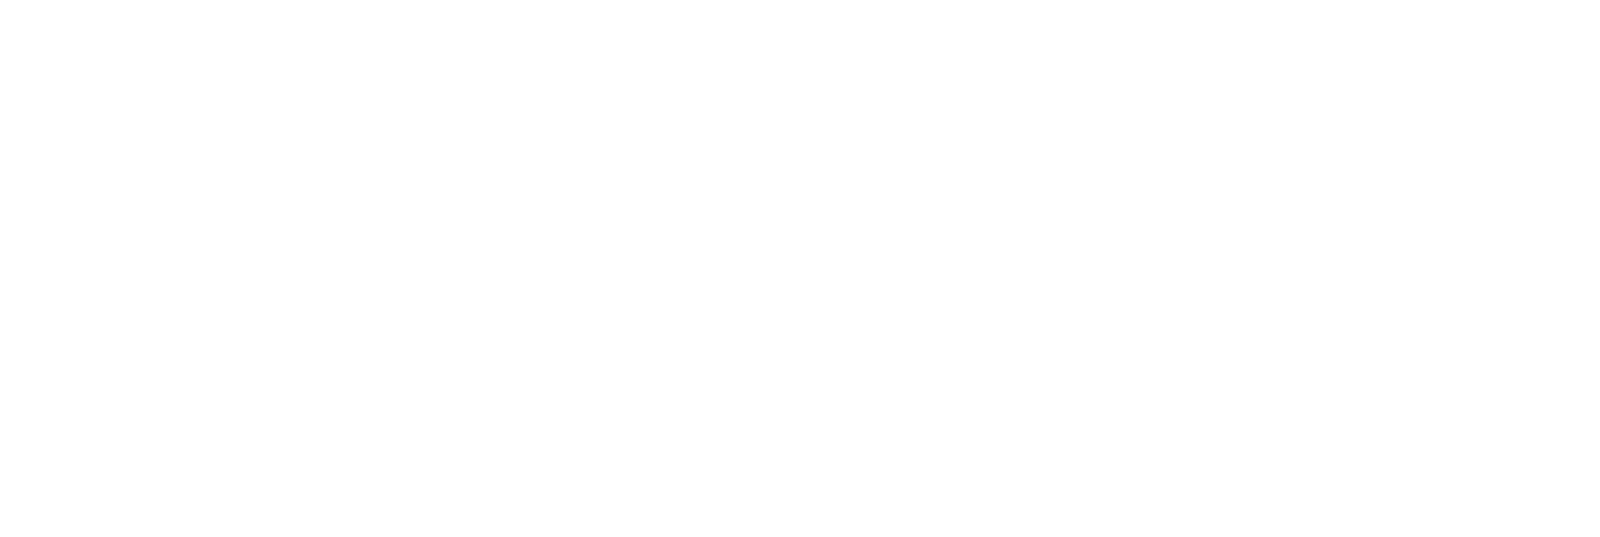 About Us | TS Pool Tile Cleaning | North San Diego County